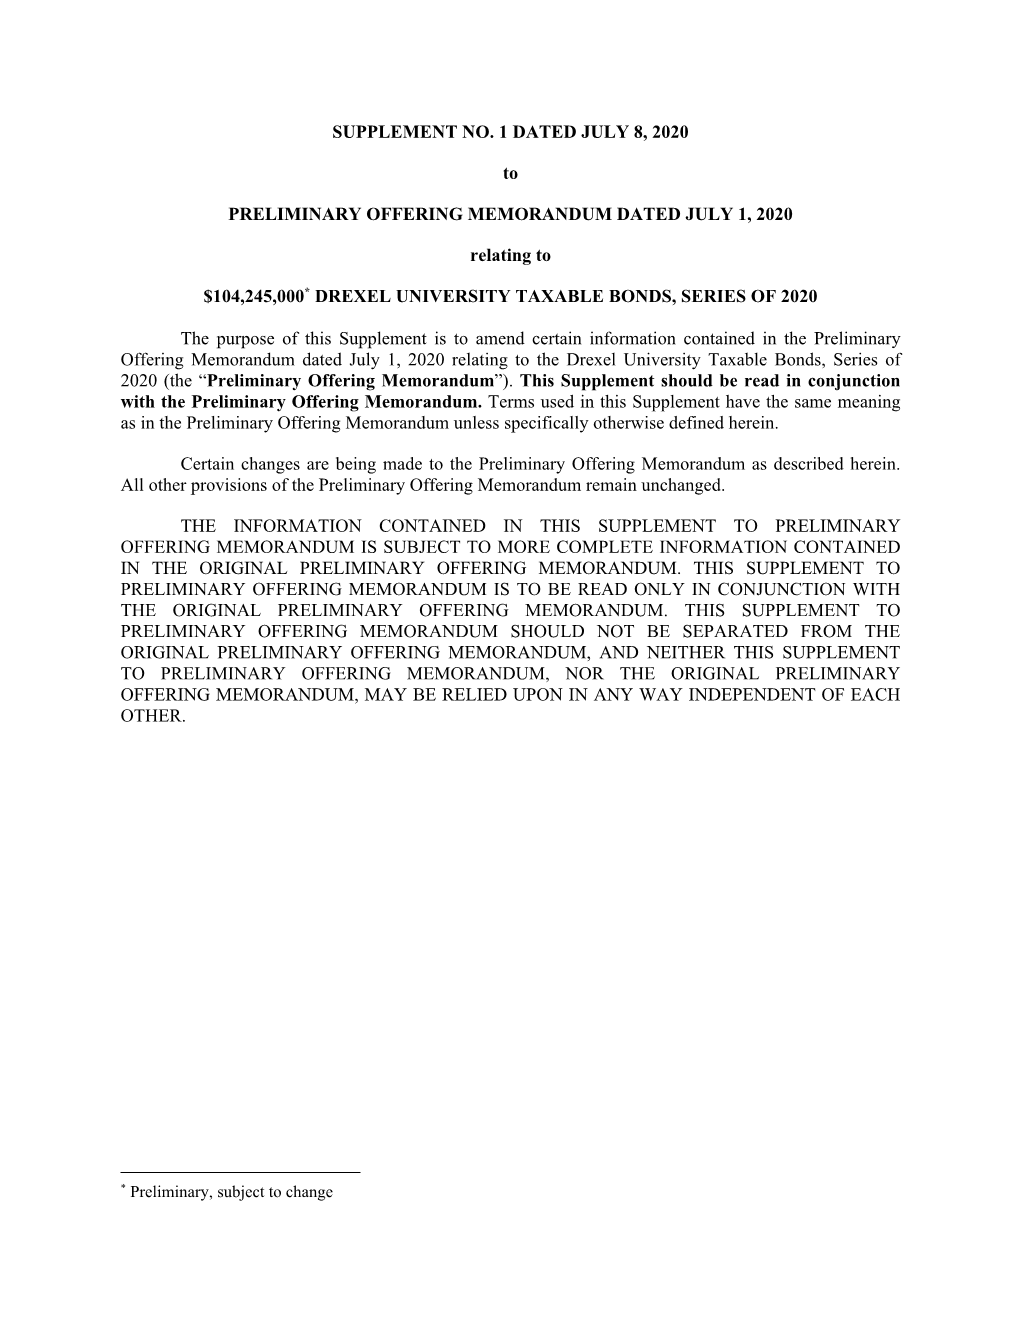 SUPPLEMENT NO. 1 DATED JULY 8, 2020 to PRELIMINARY OFFERING MEMORANDUM DATED JULY 1, 2020 Relating to $104,245,000* DREXEL UNIVE